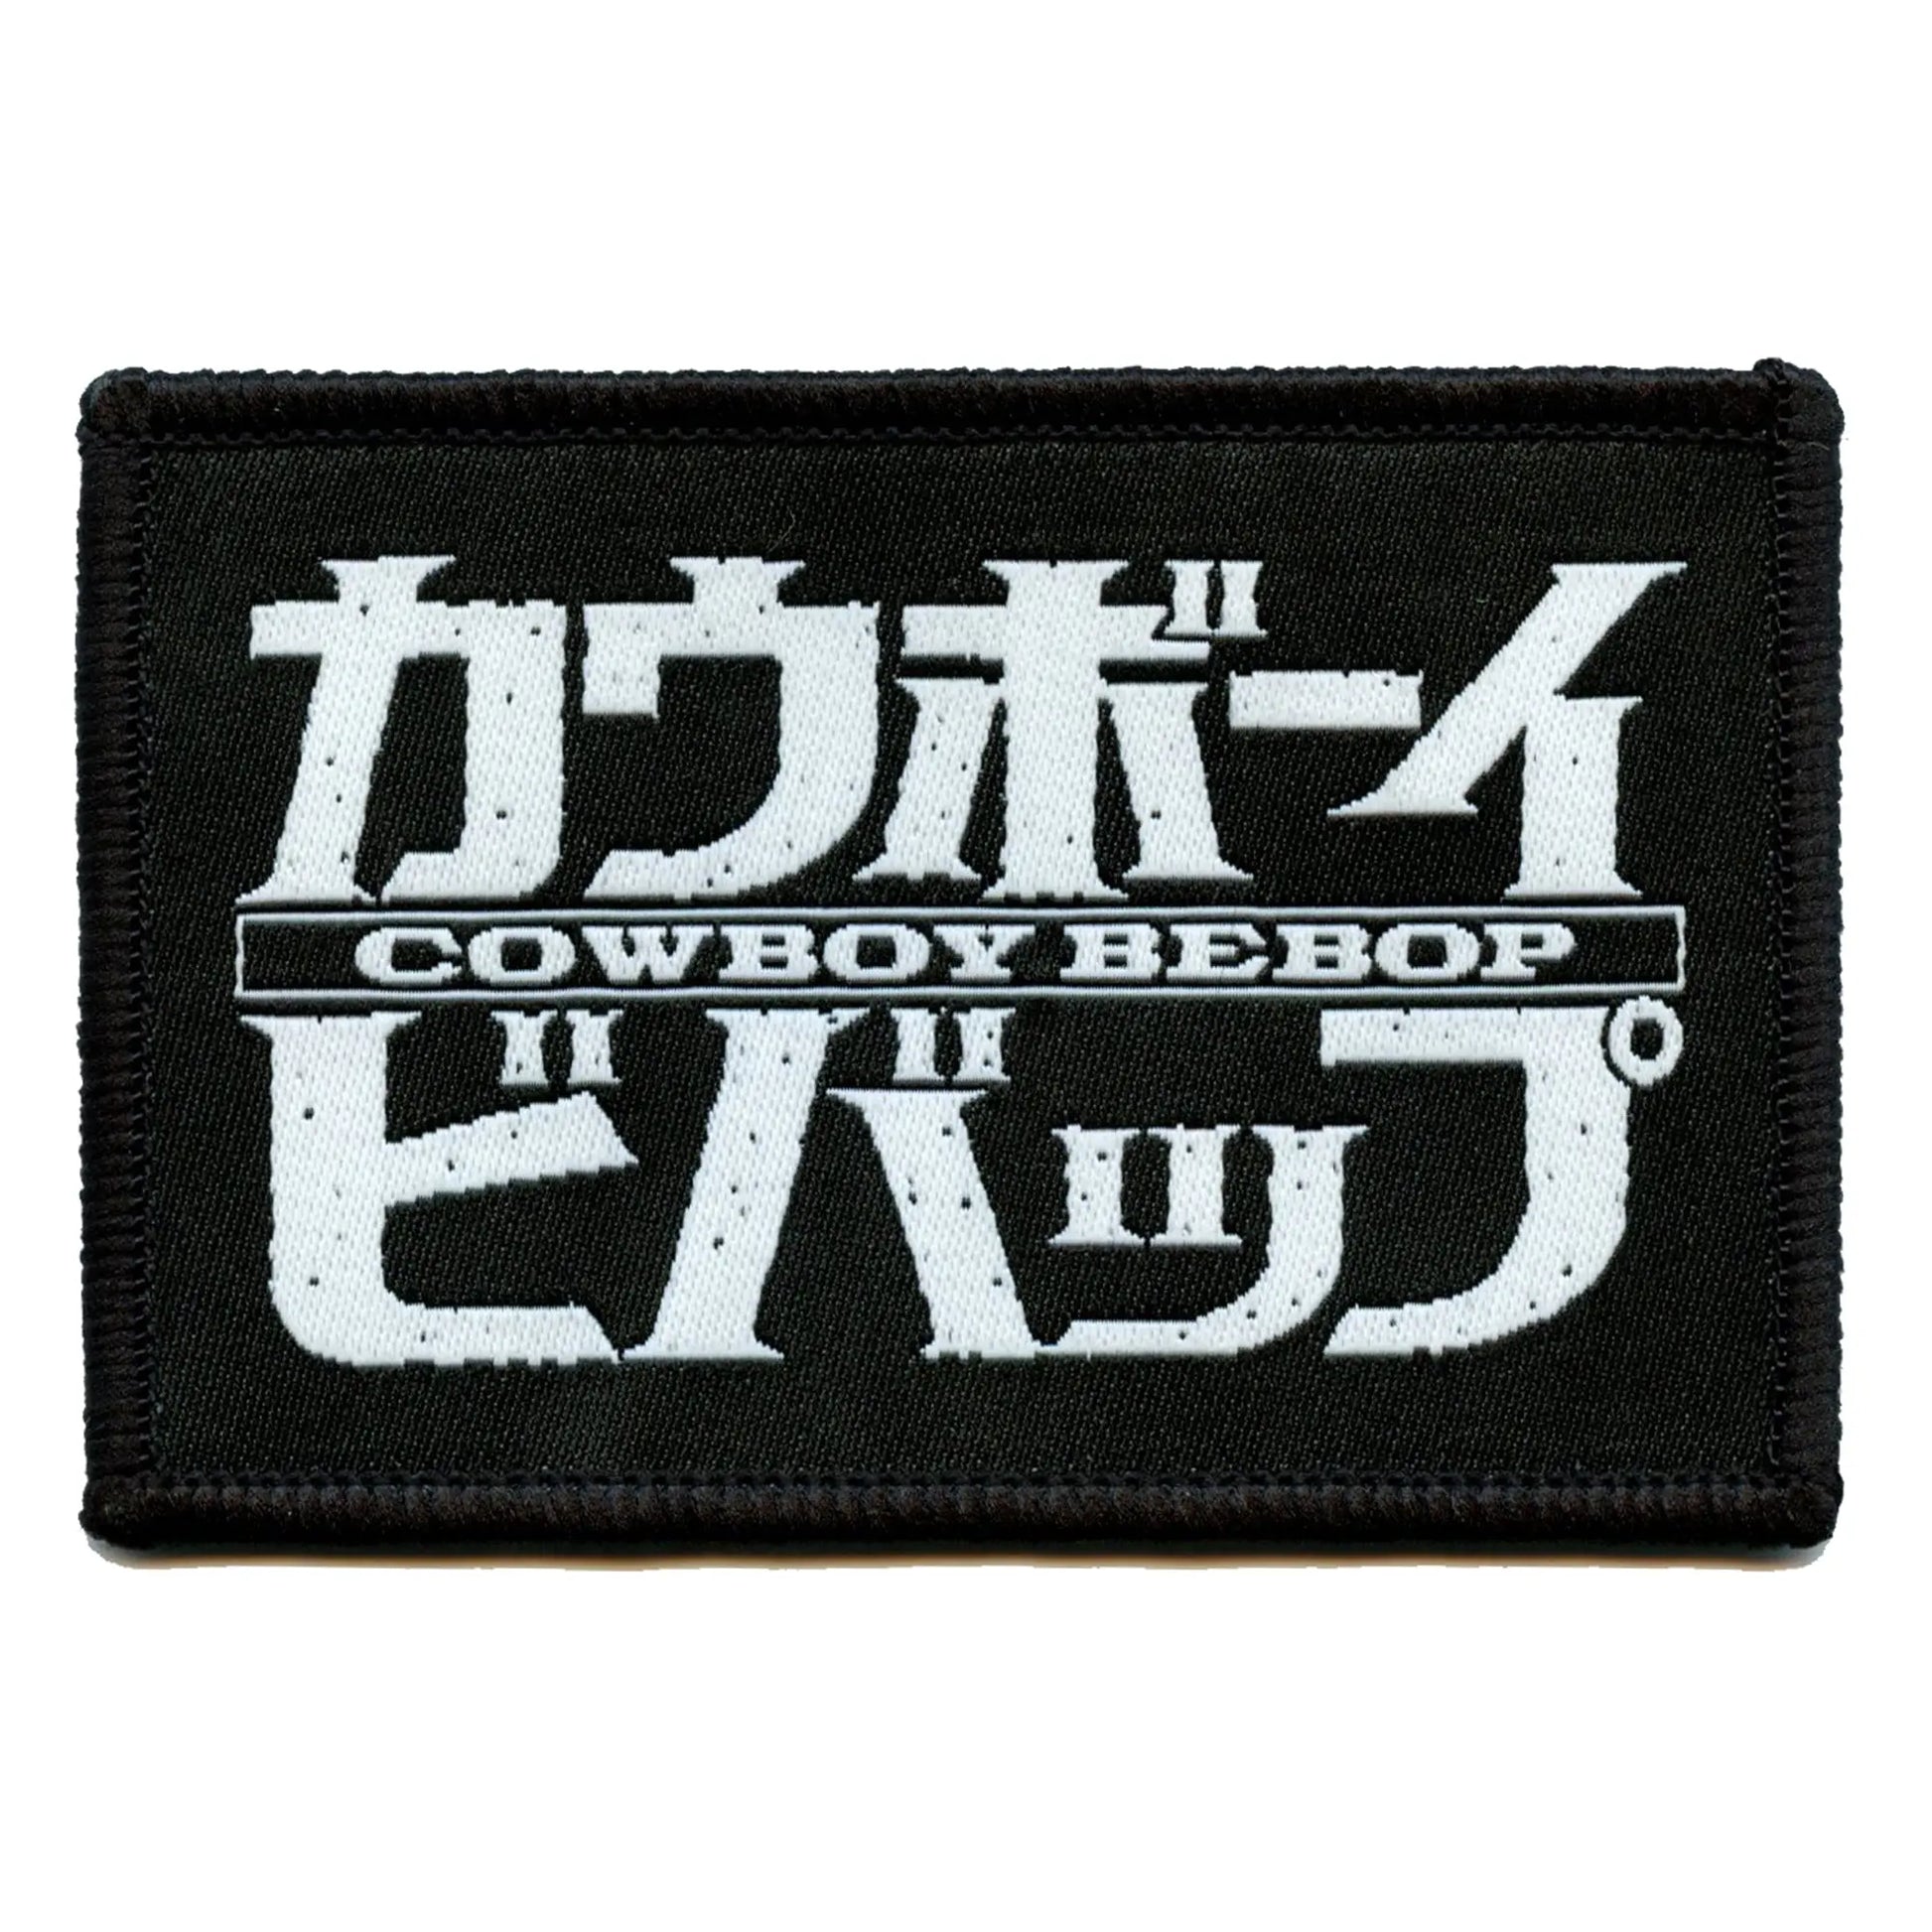 Cowboy Bebop Official Logo Patch Anime Bounty Western Woven Iron On